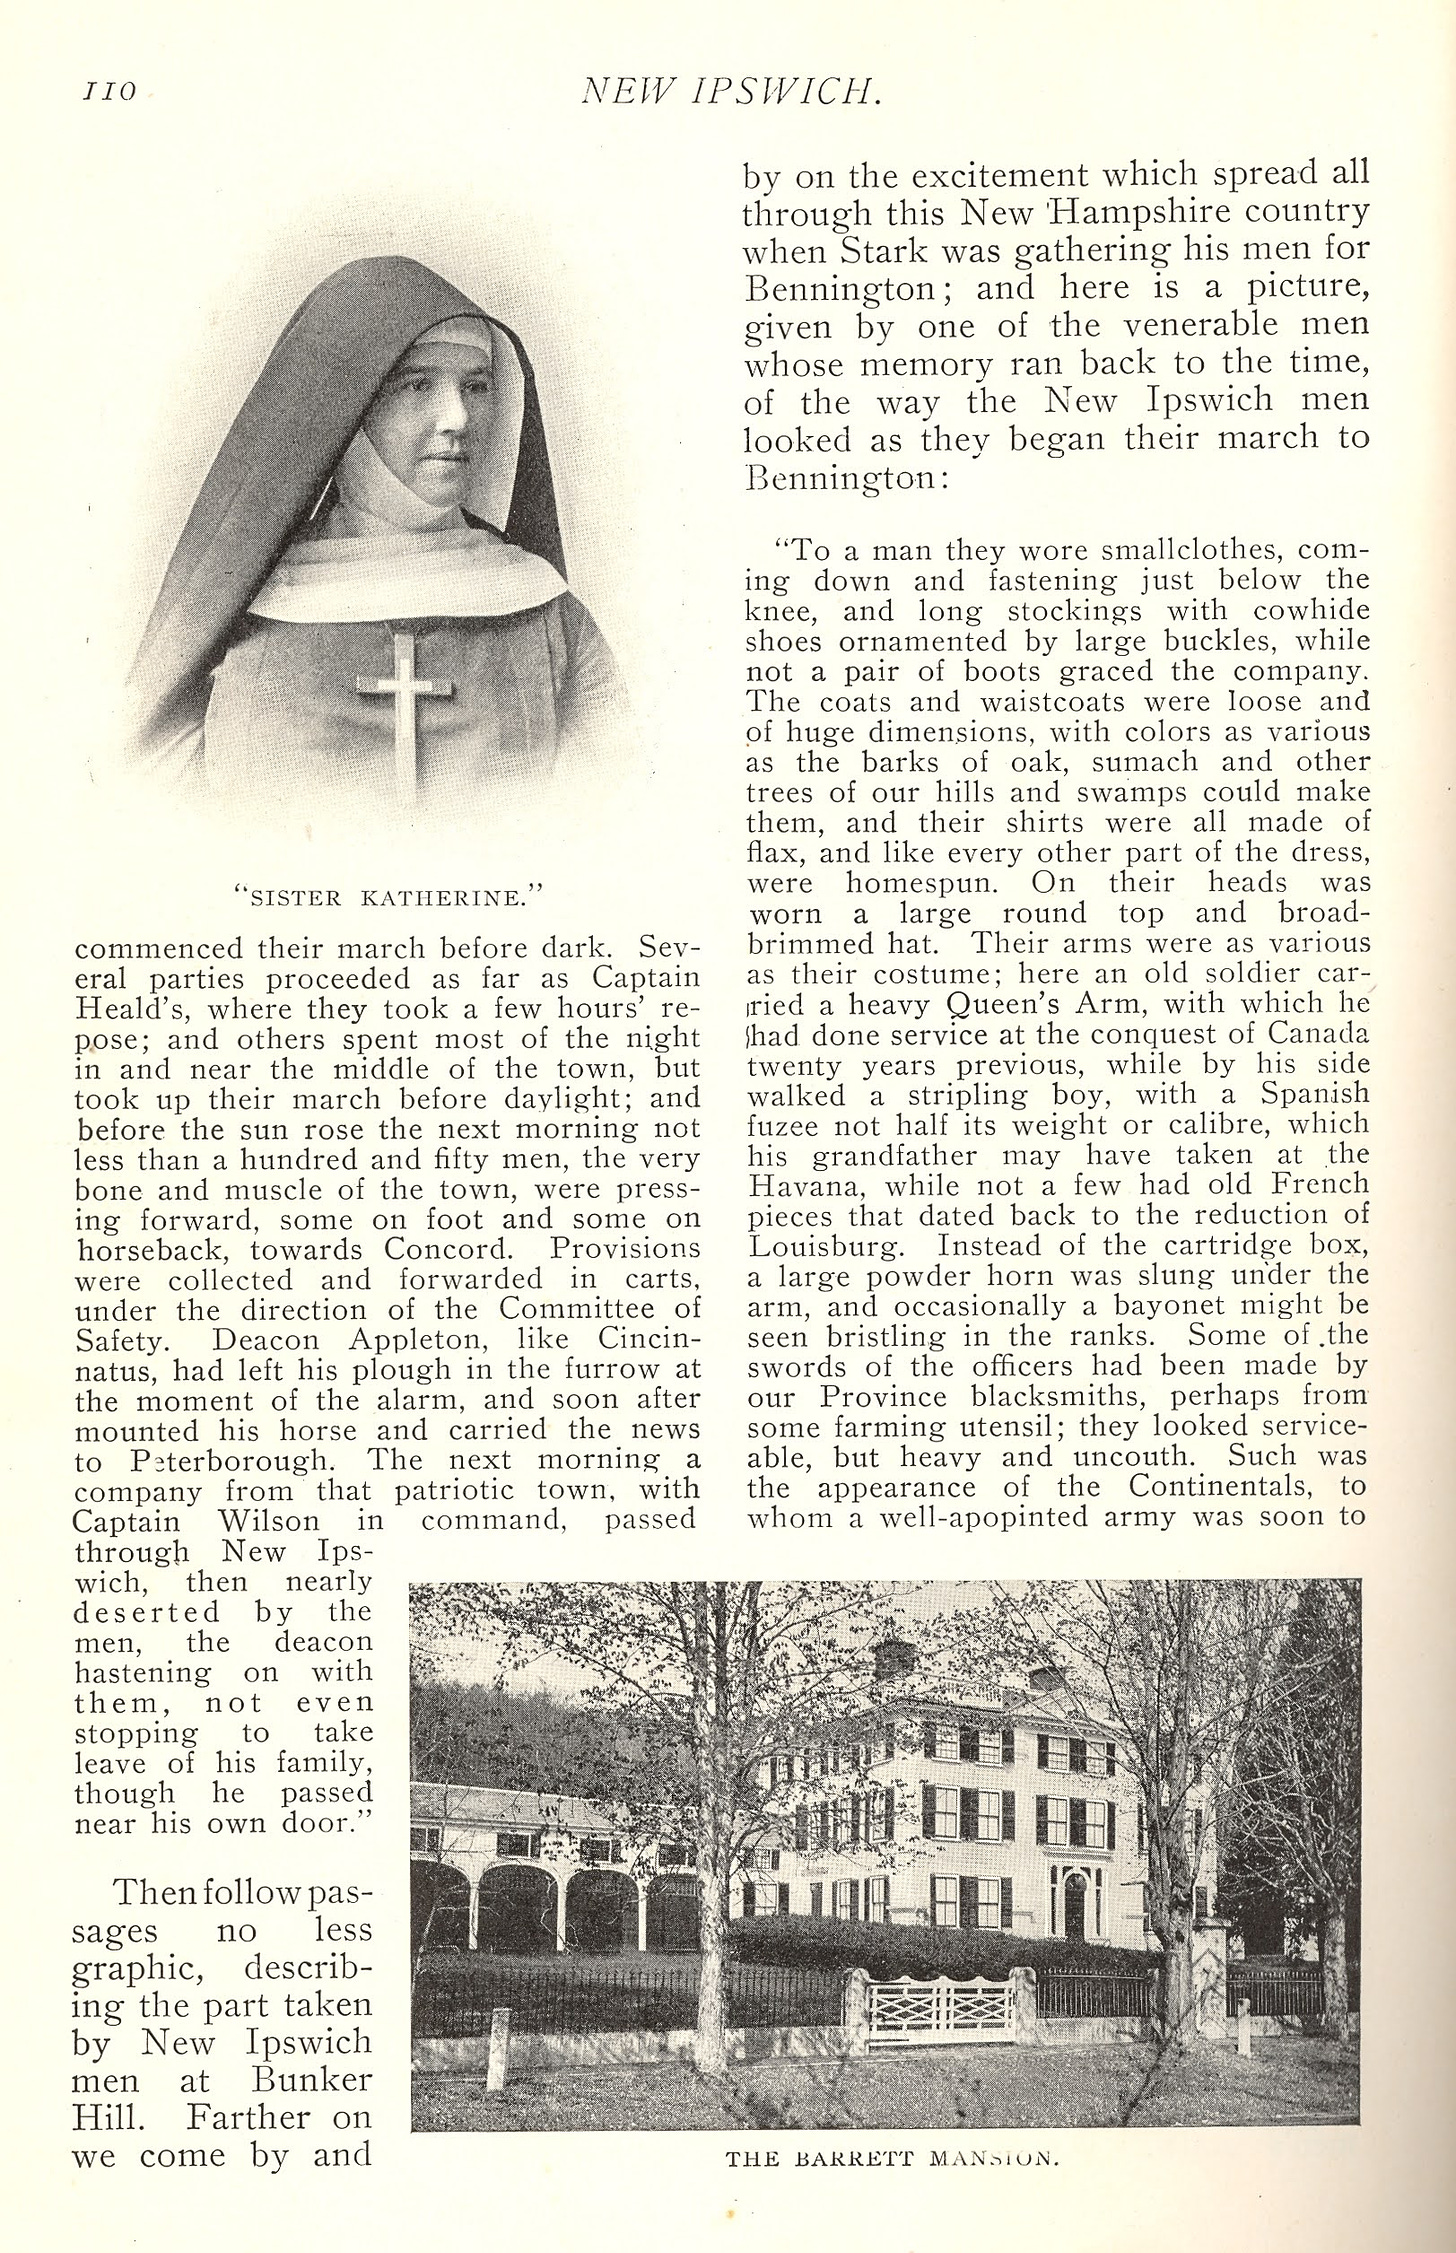 New England Magazine, March 1900, page 110